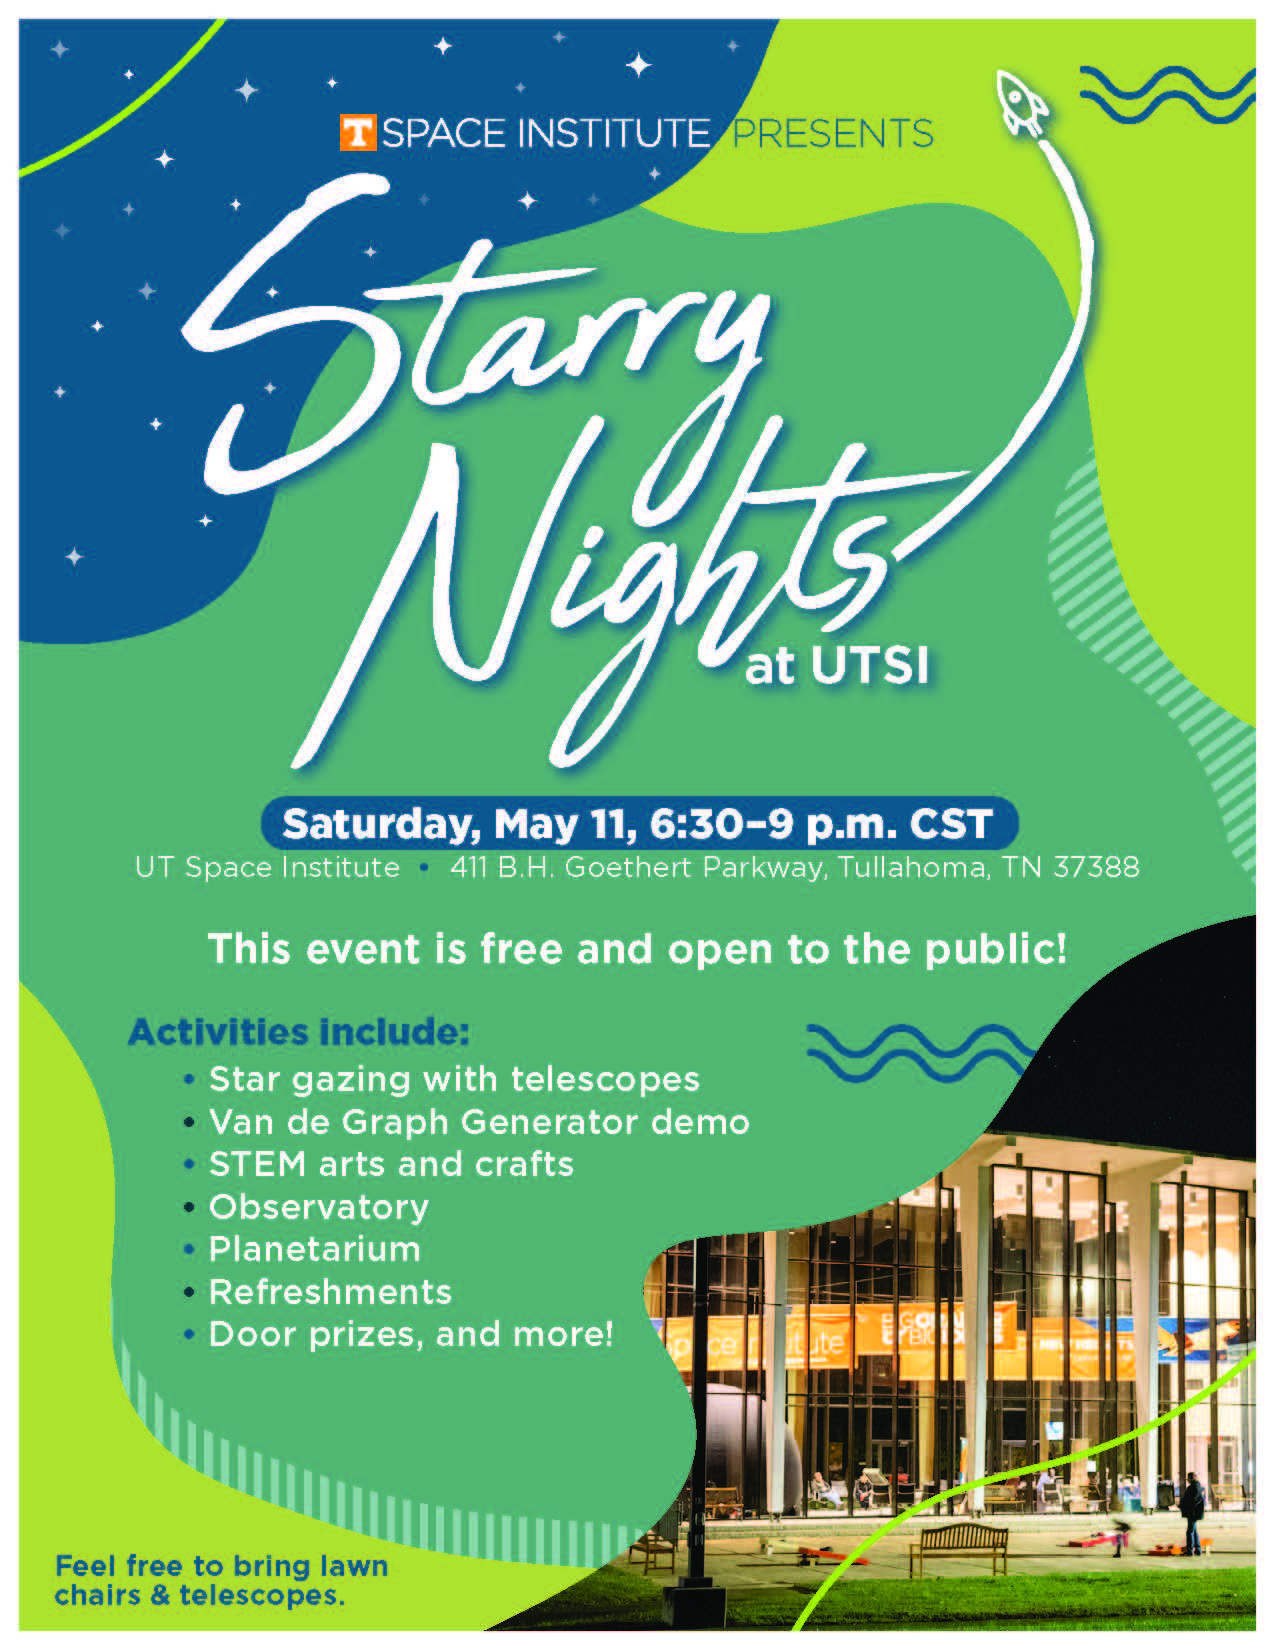 Flyer for Starry Nights at UTSI